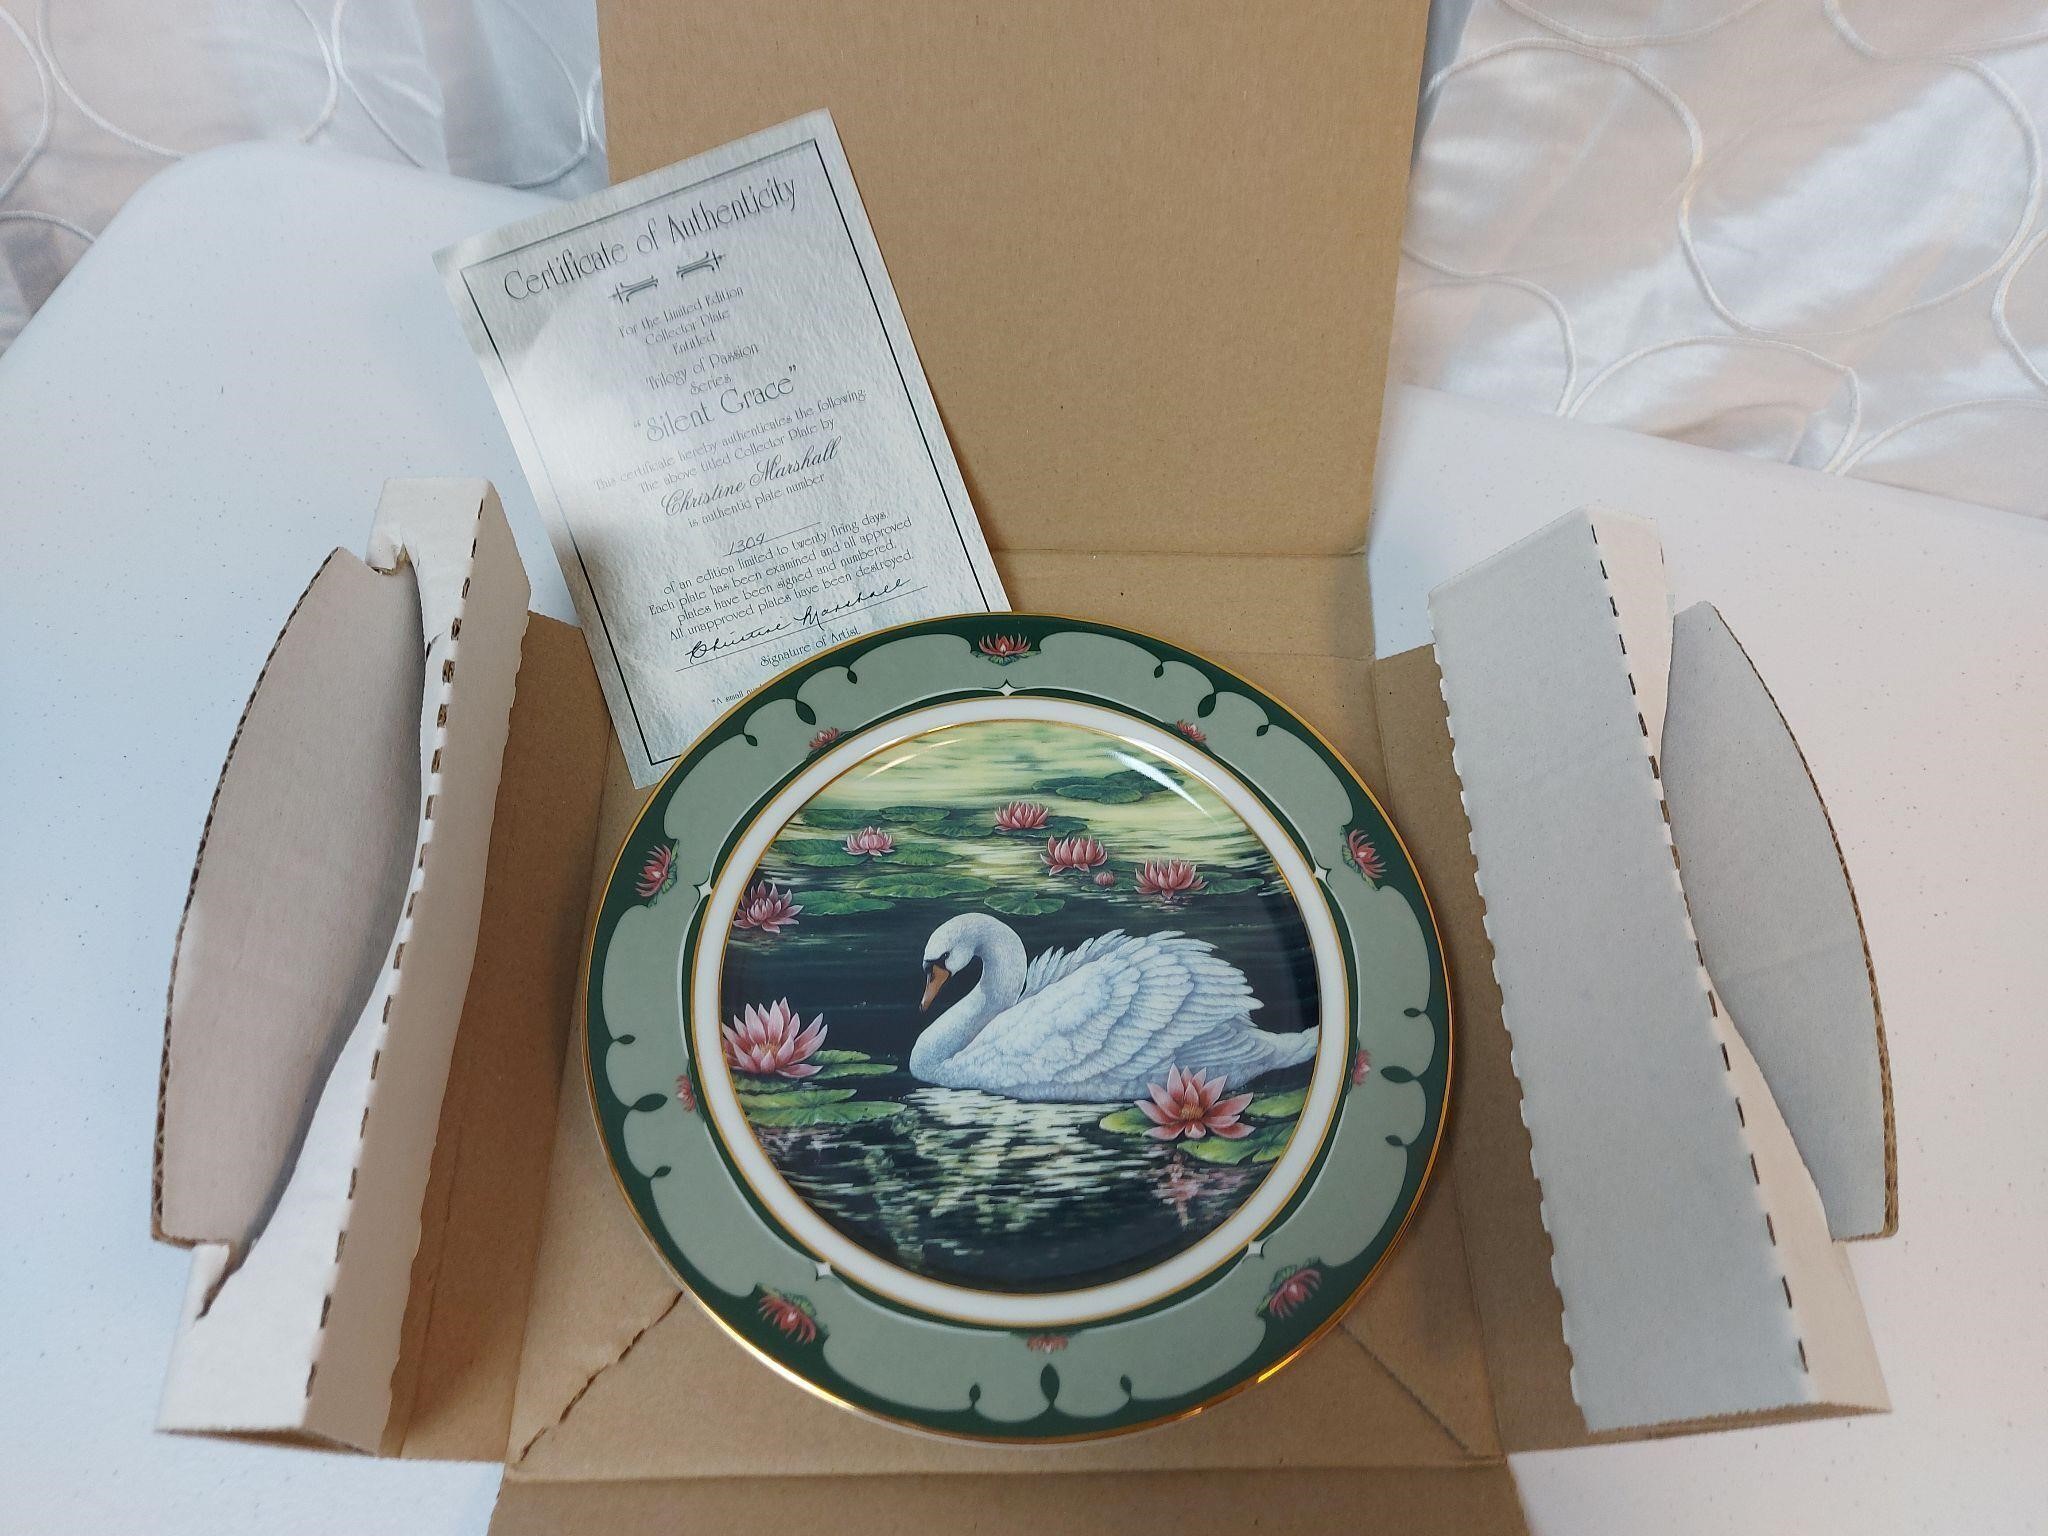 Silent Grace Collector's Plate in Box